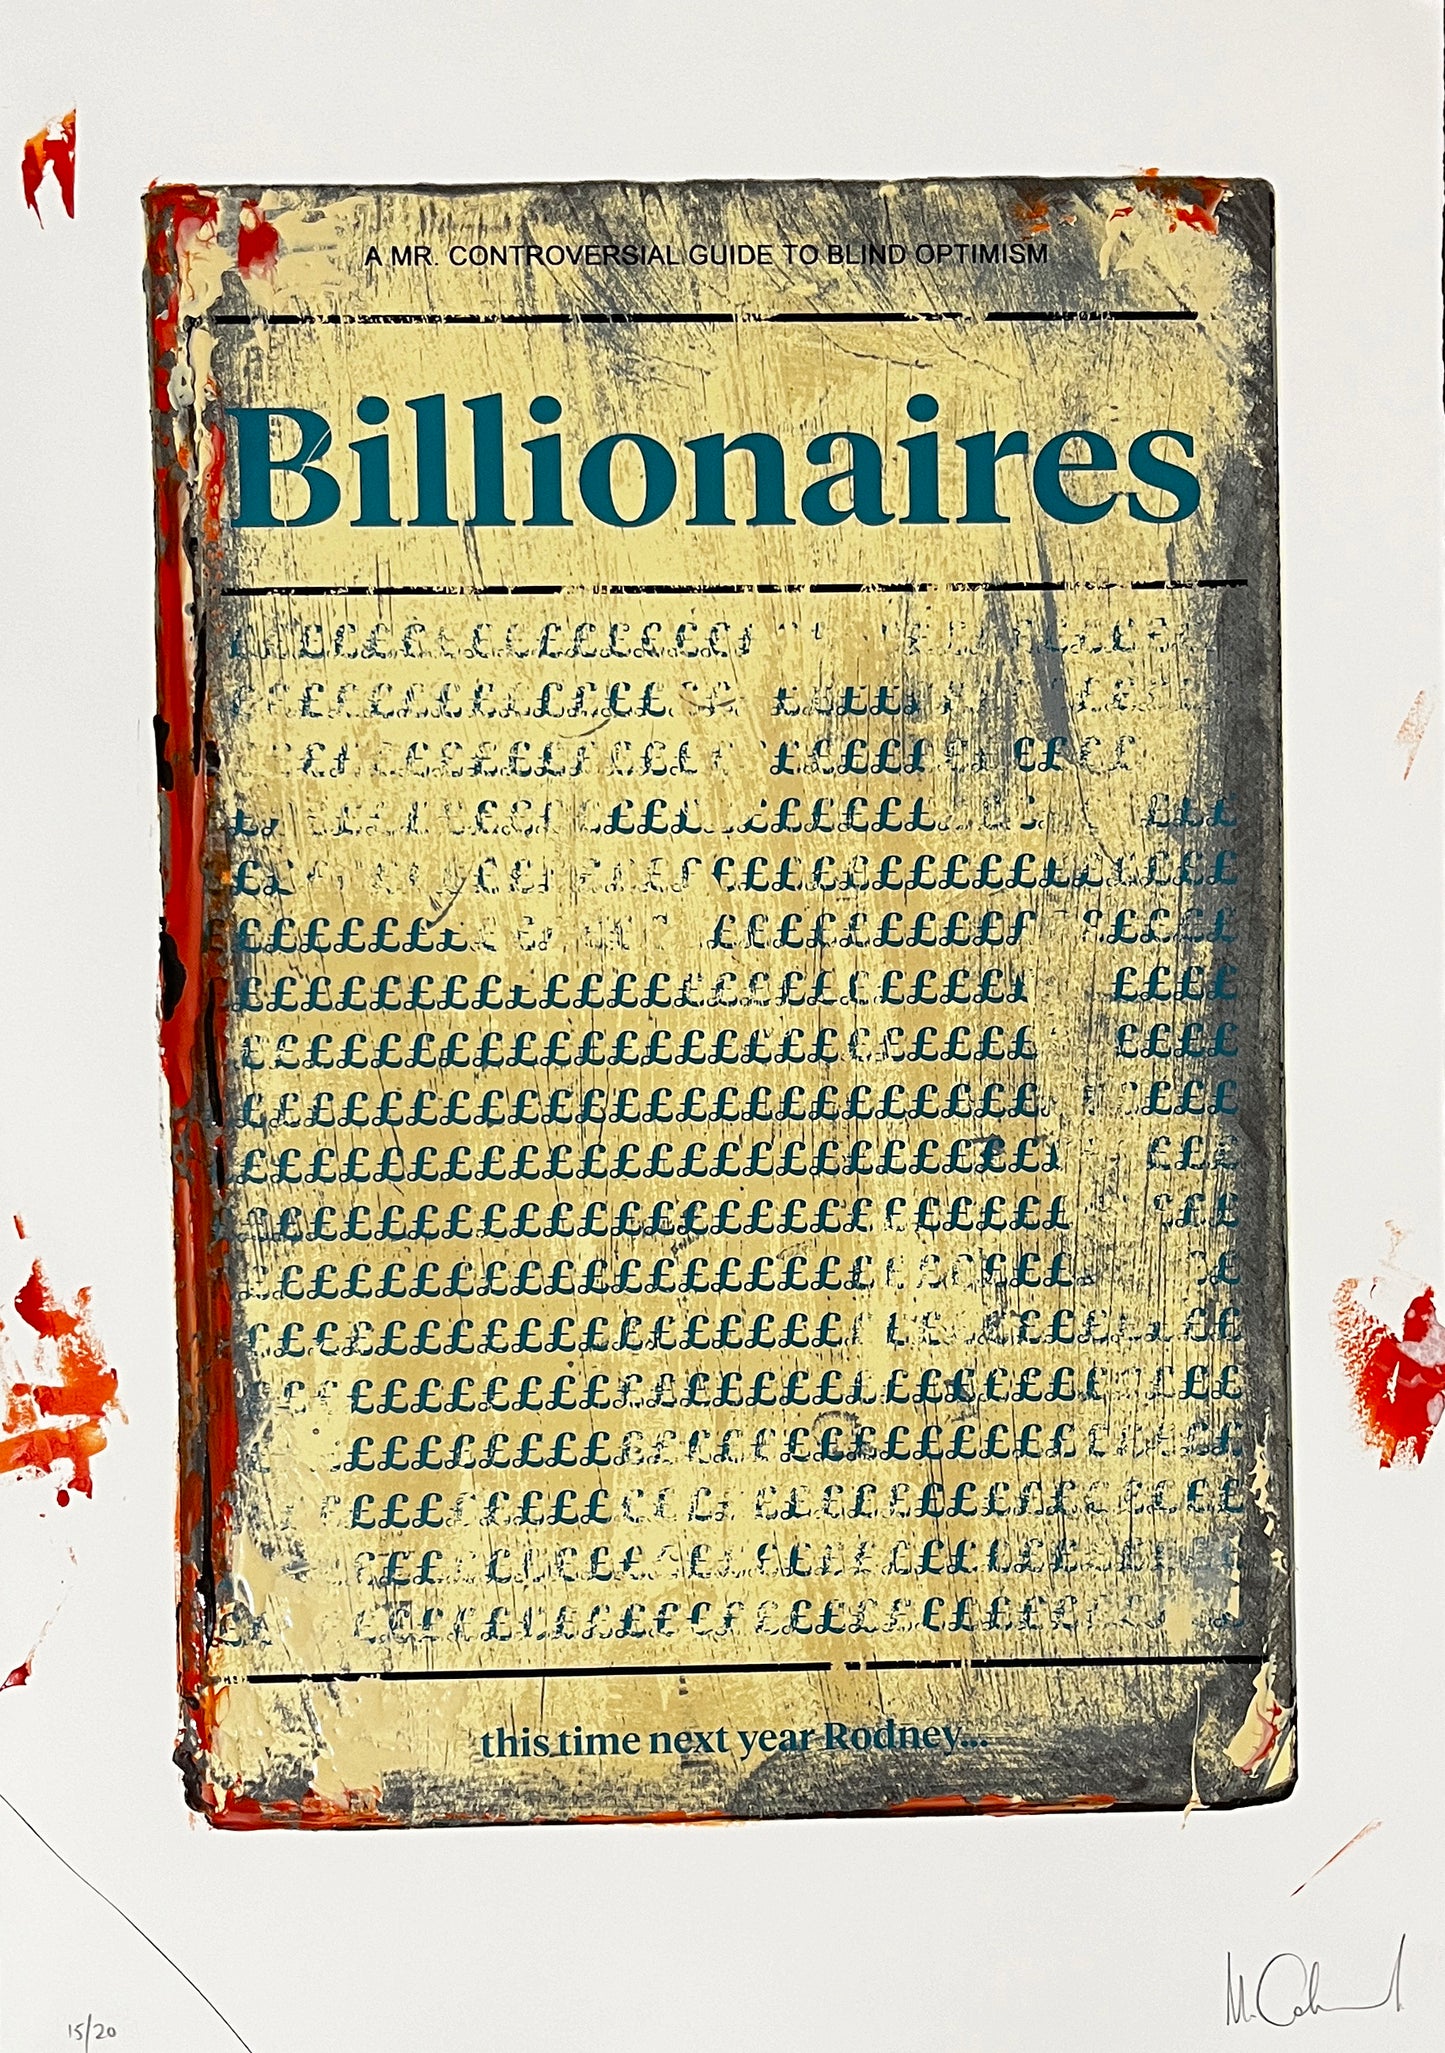 Mr Controversial, Artist, Billionaires, Edition 15, Hand-finished limited edition, TAP Galleries, Essex Chelmsford Art Gallery 